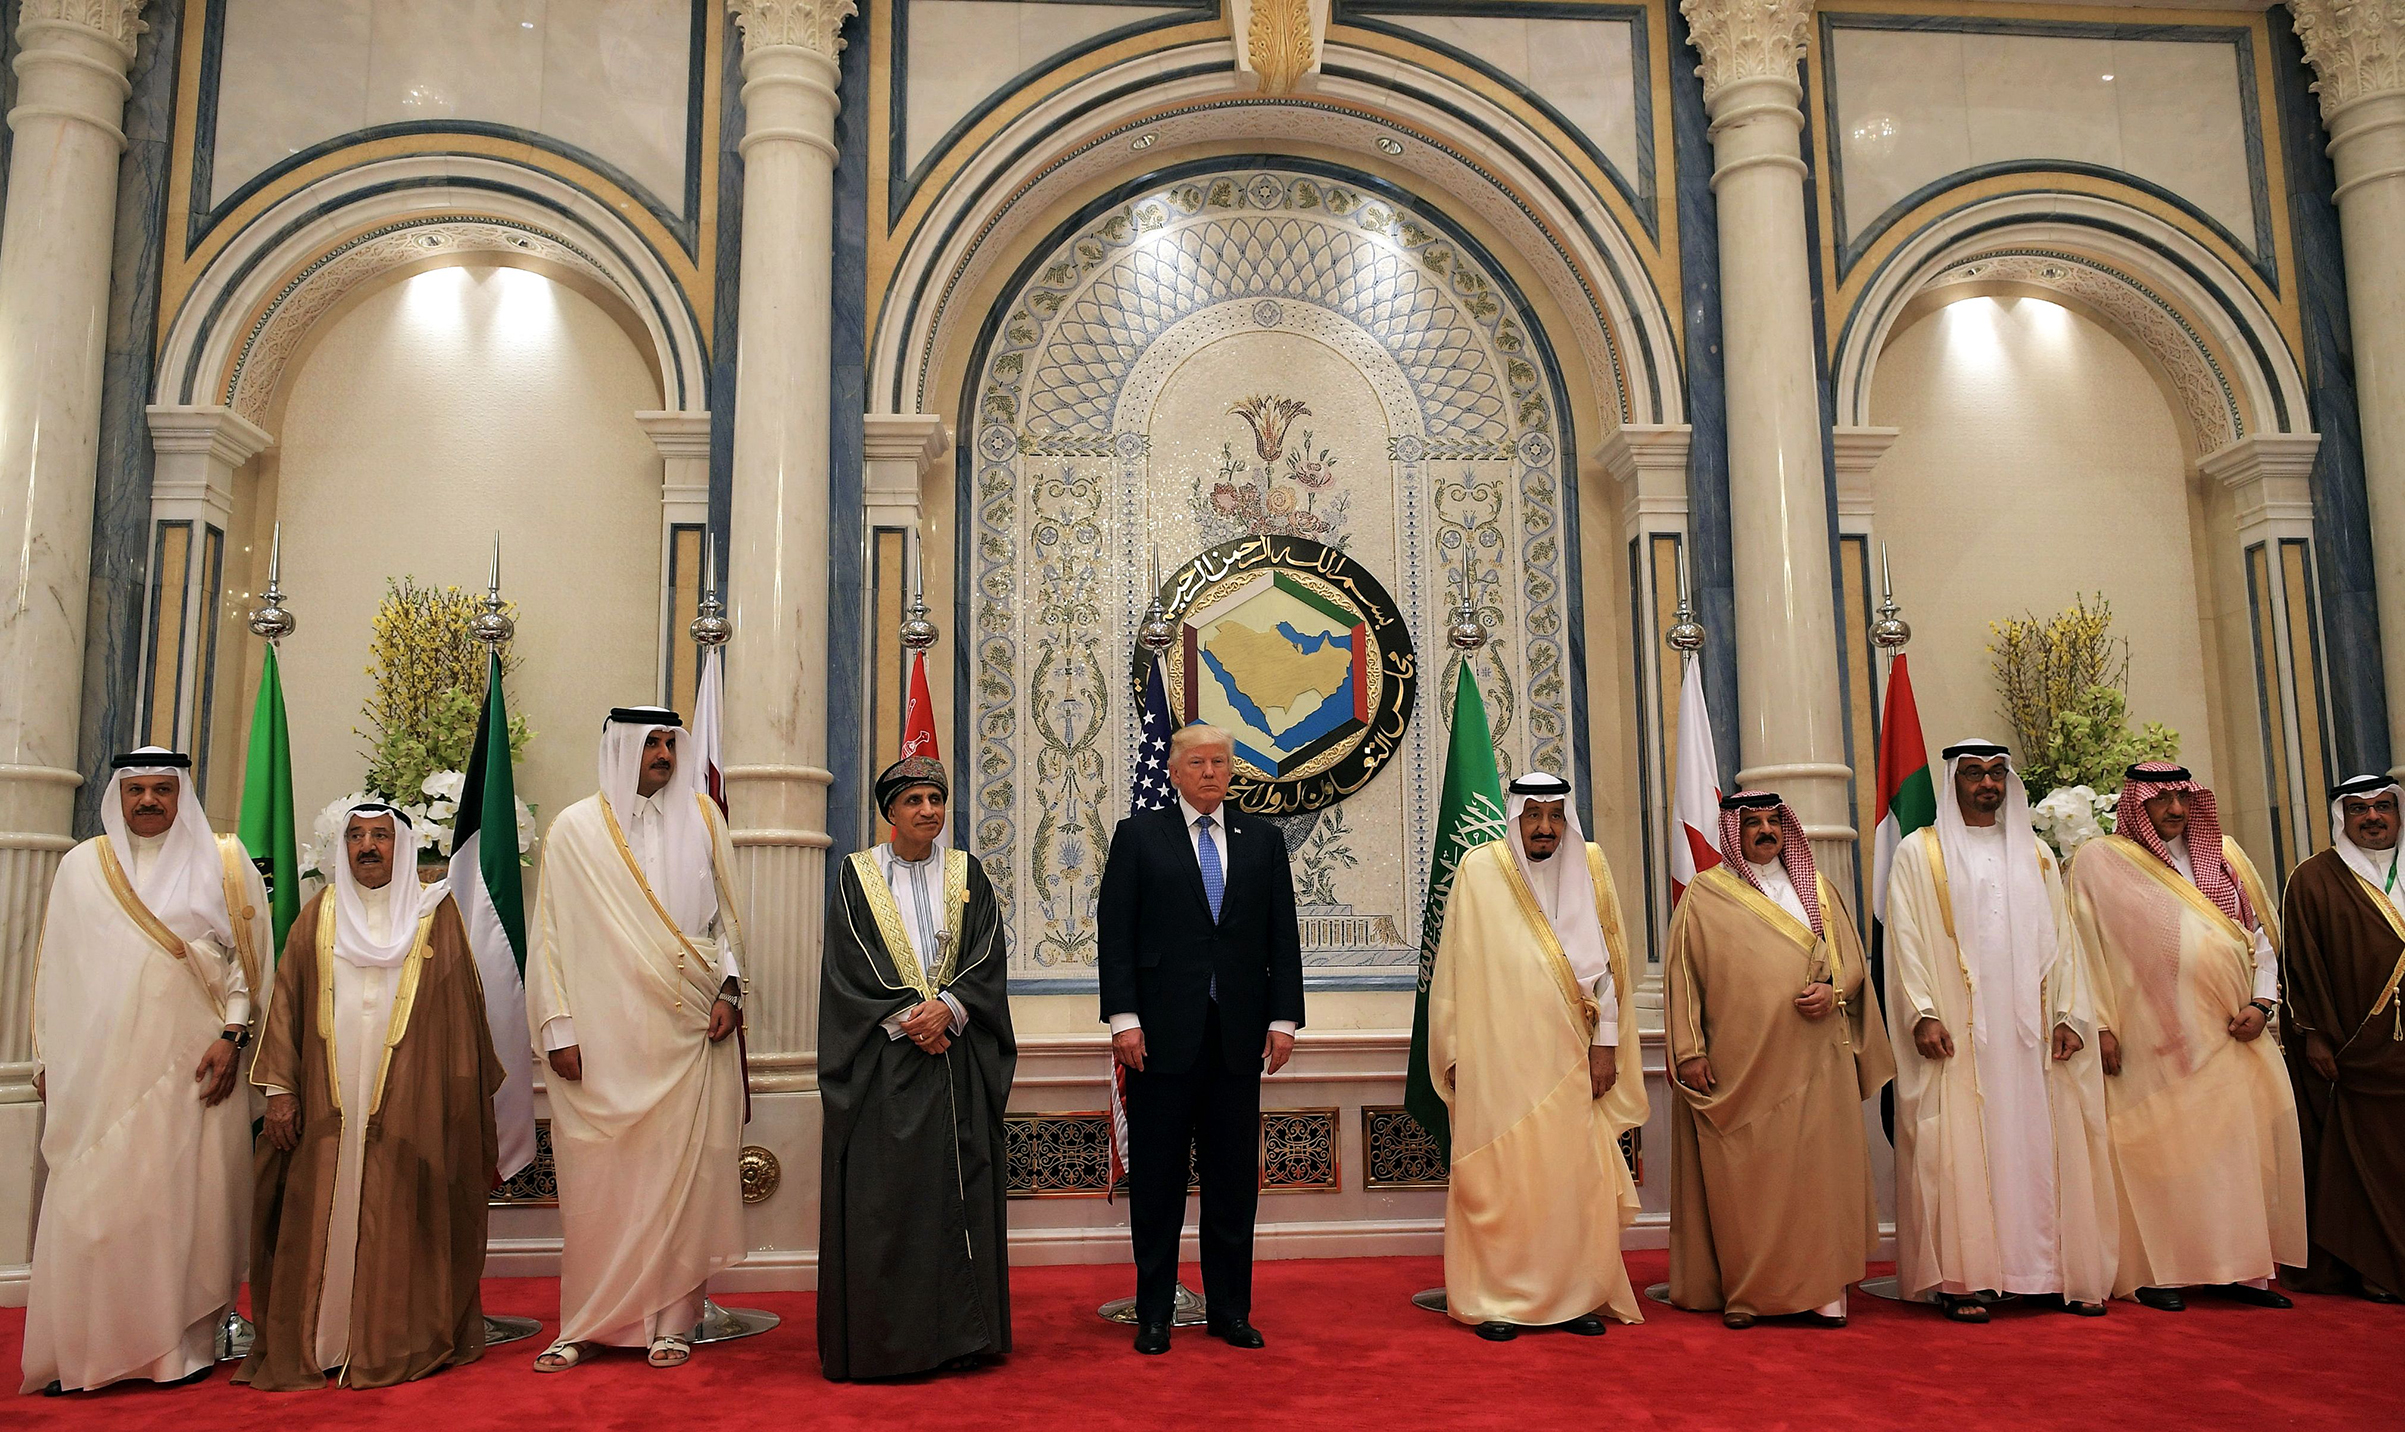 middle-east-rifts-widening-amid-global-power-vacuum